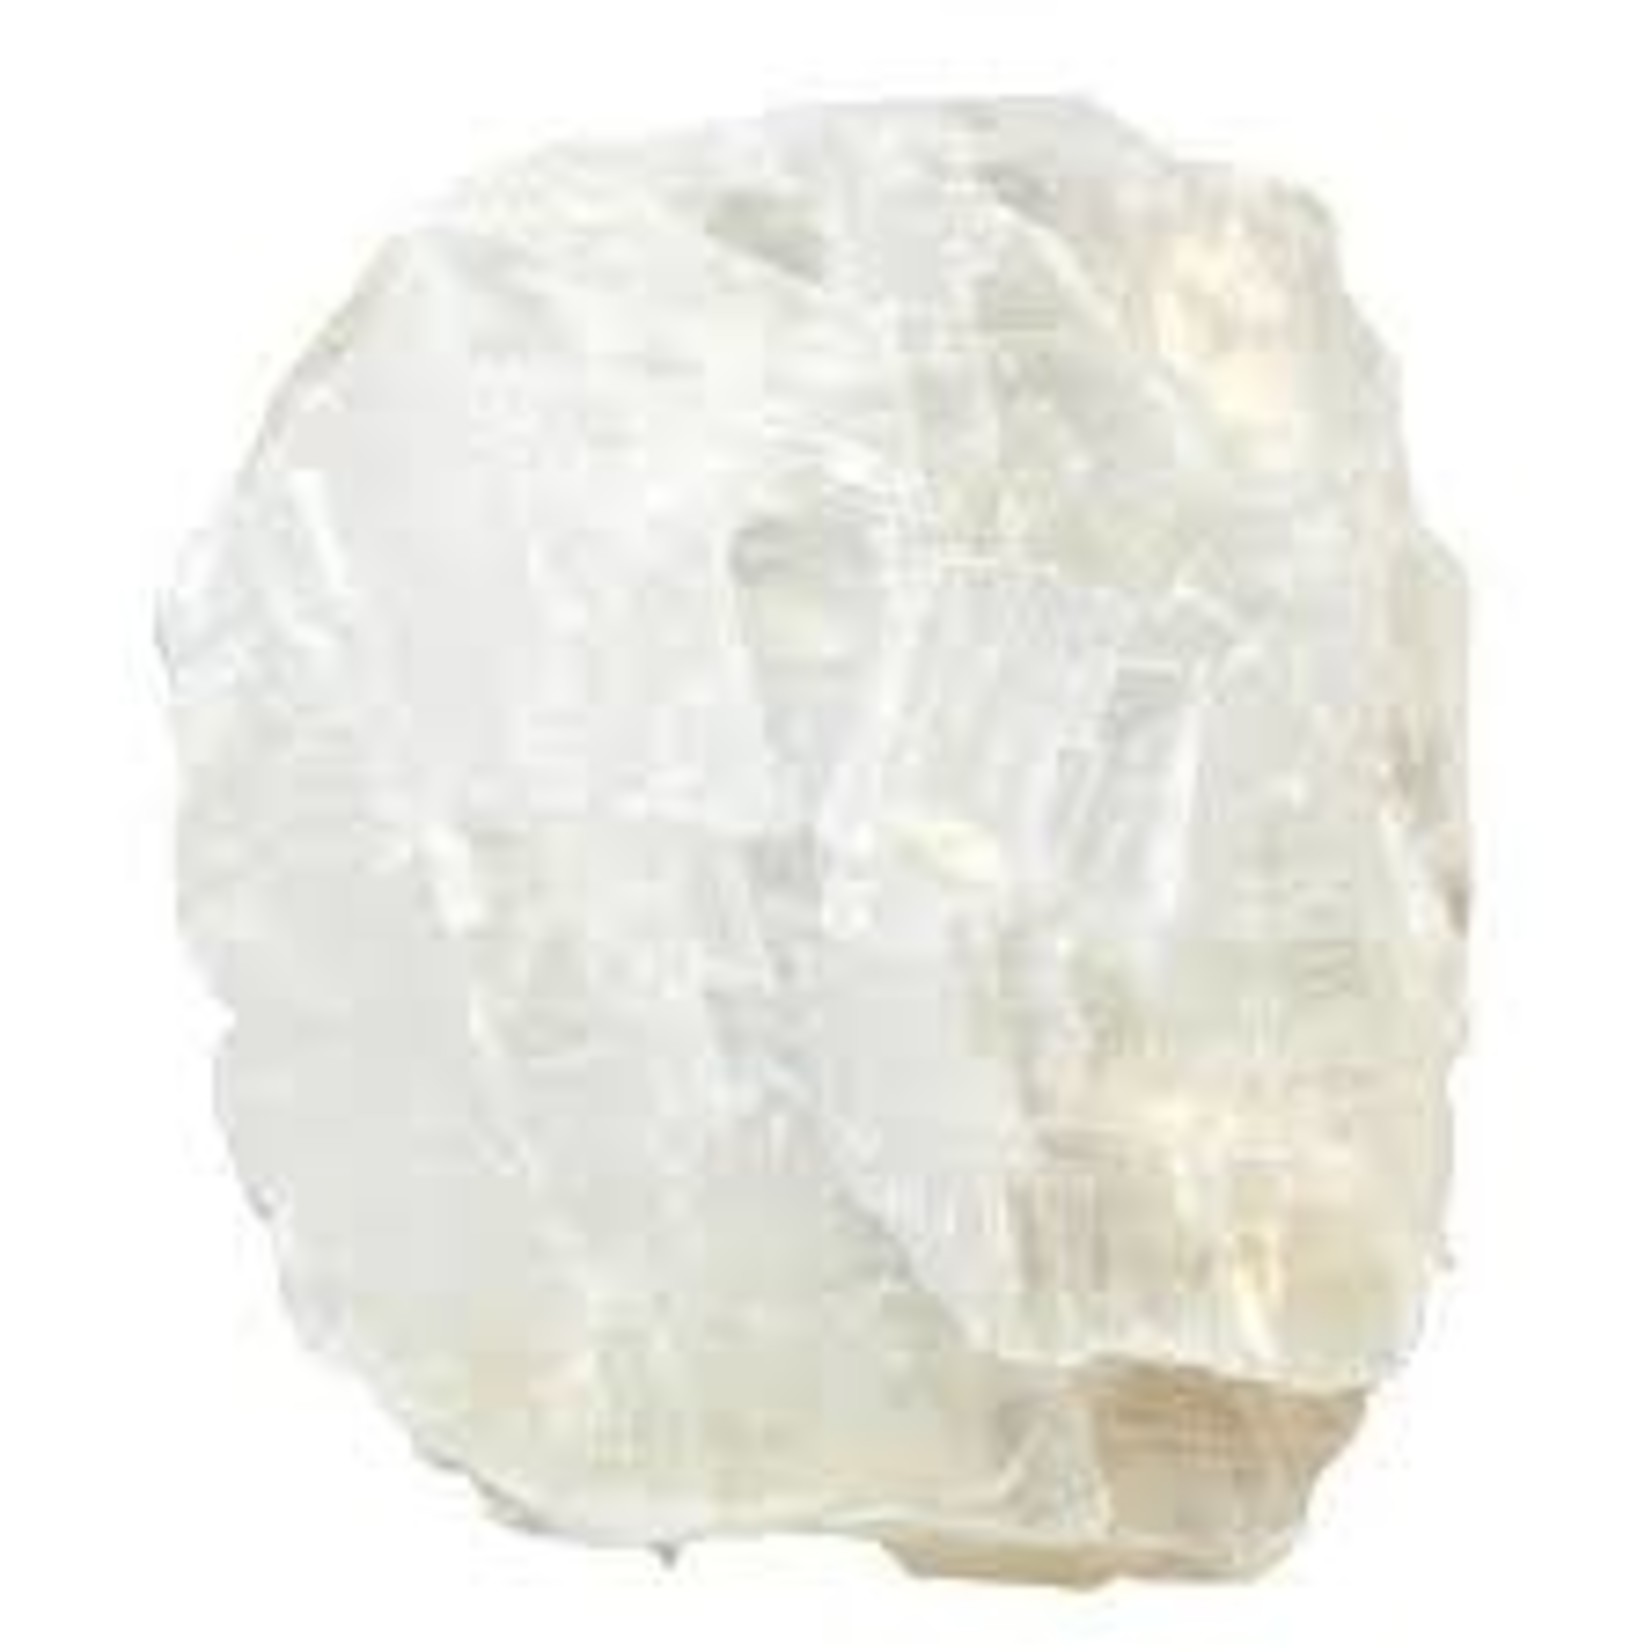 Utah Ice Rock by The Pound